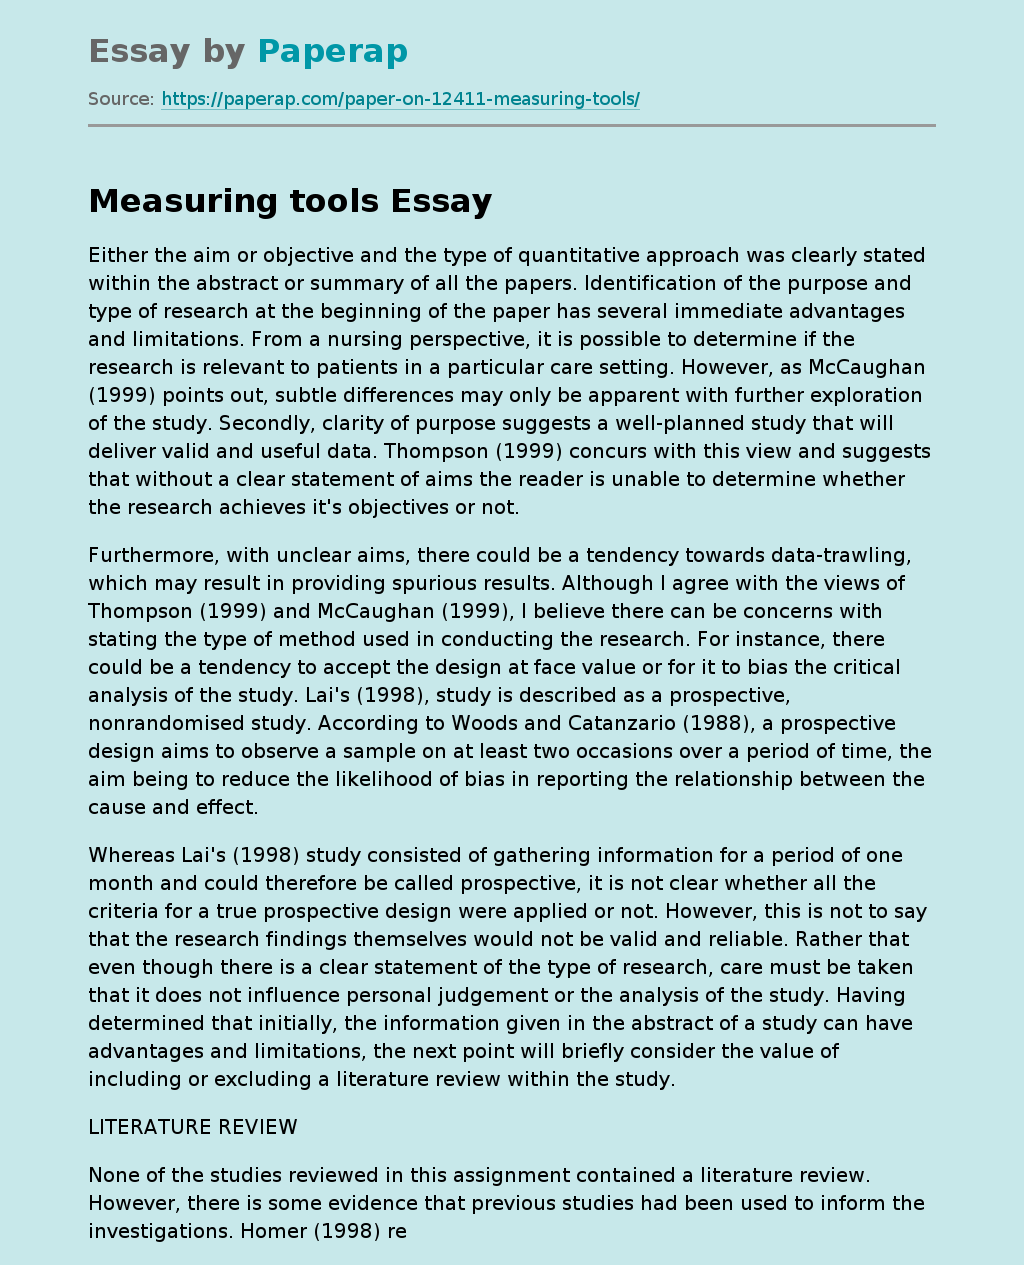 Measuring Instruments and Their Accuracy